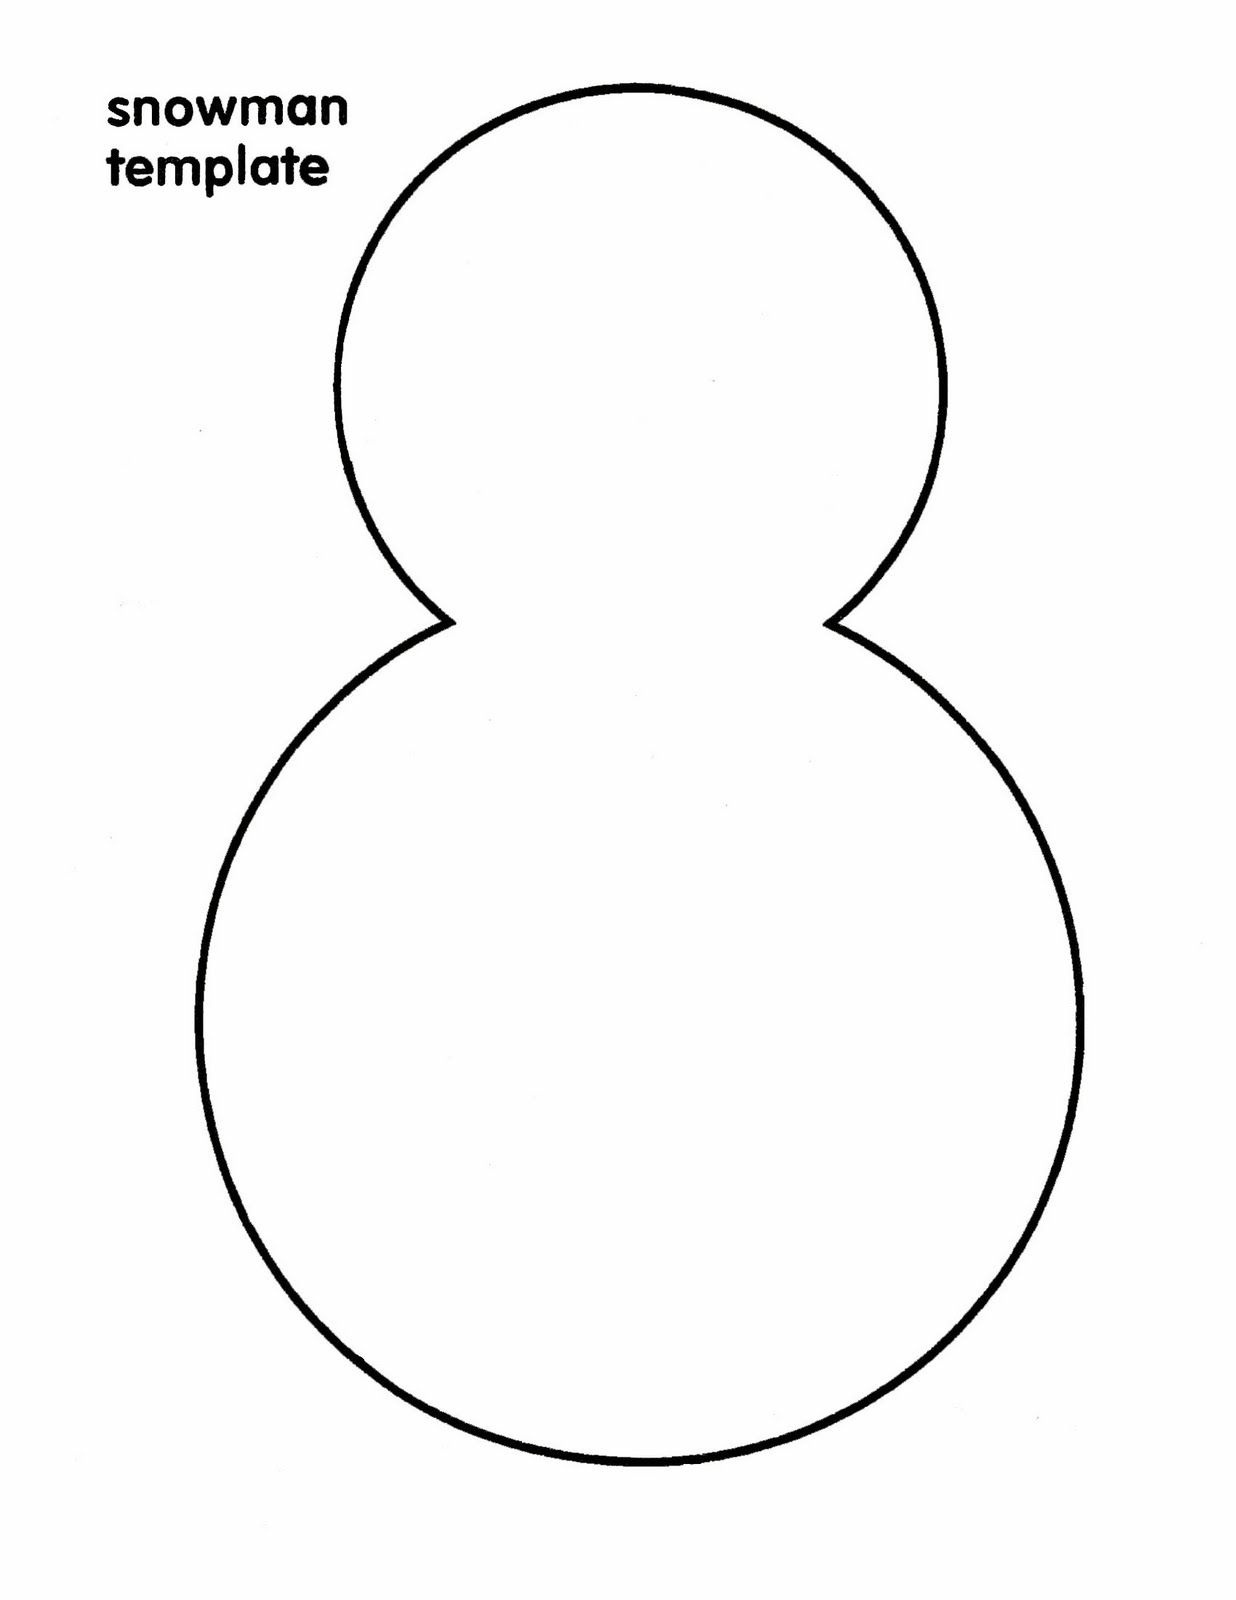 Snowman Pictures To Color To Color They May Enjoy This Printable